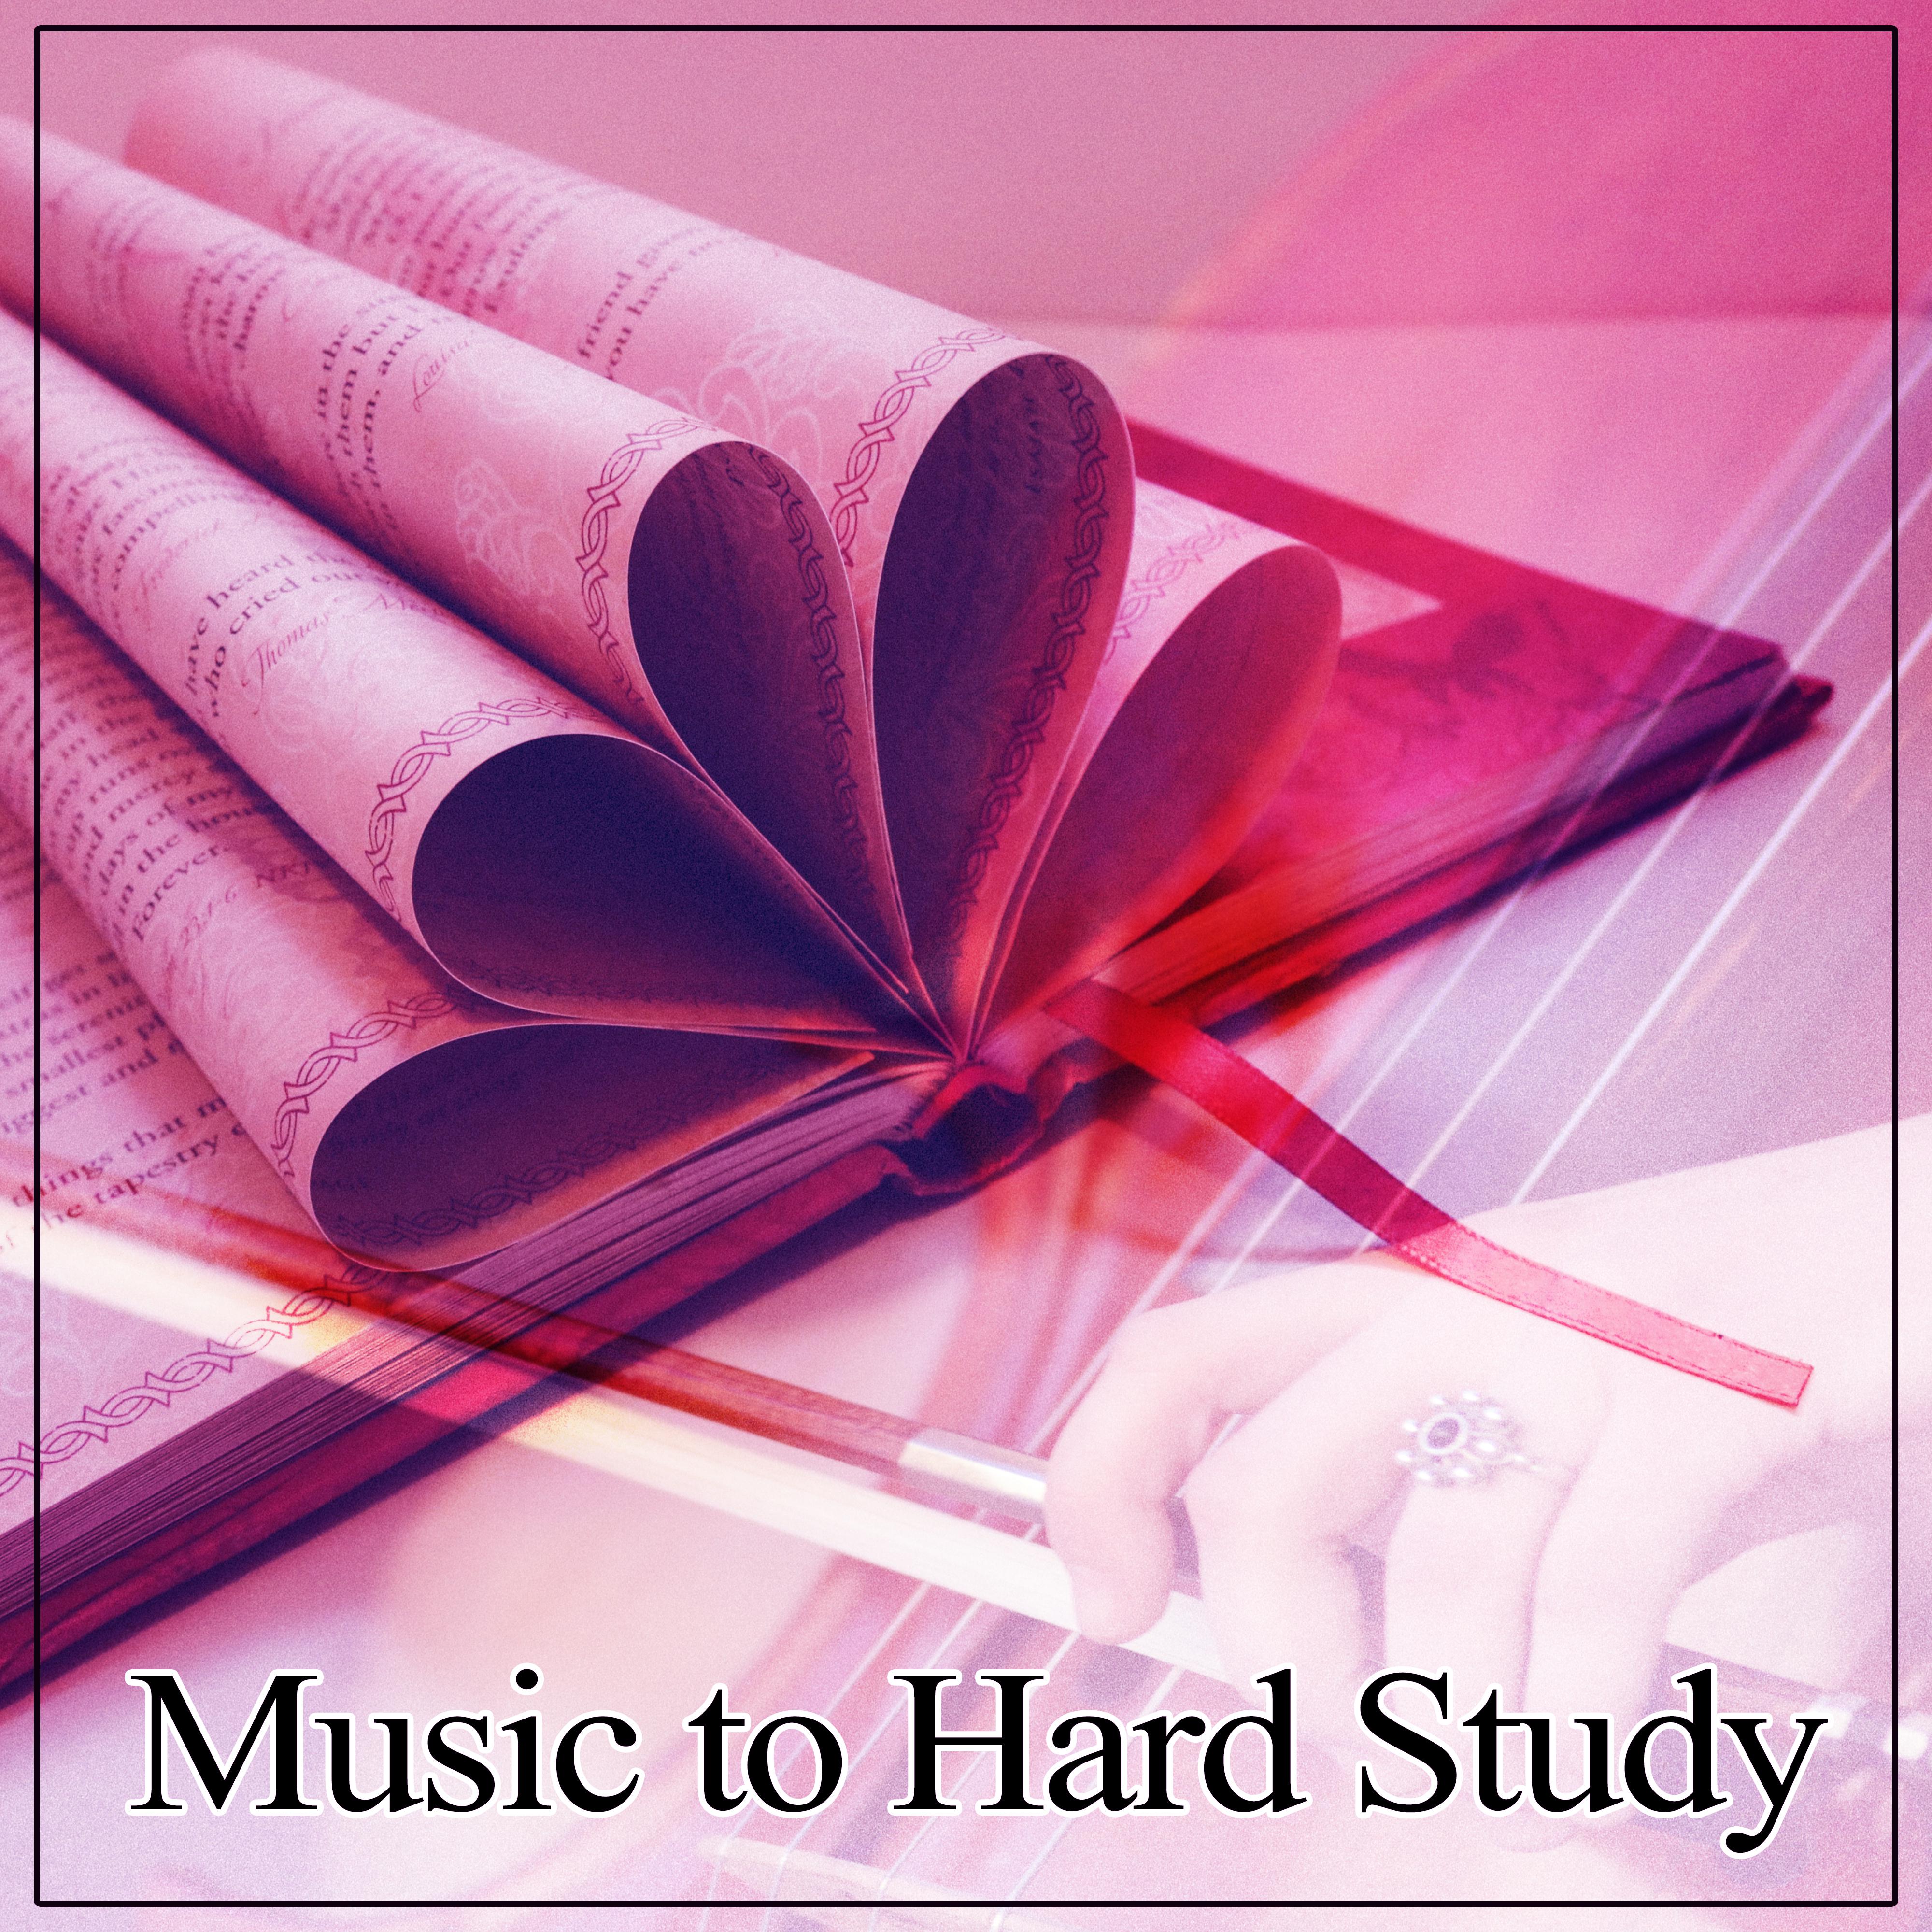 Music to Hard Study – Classical Sounds to Study, Clear Mind, Easy Exam, Successive Study, Mozart, Bach, Beethoven